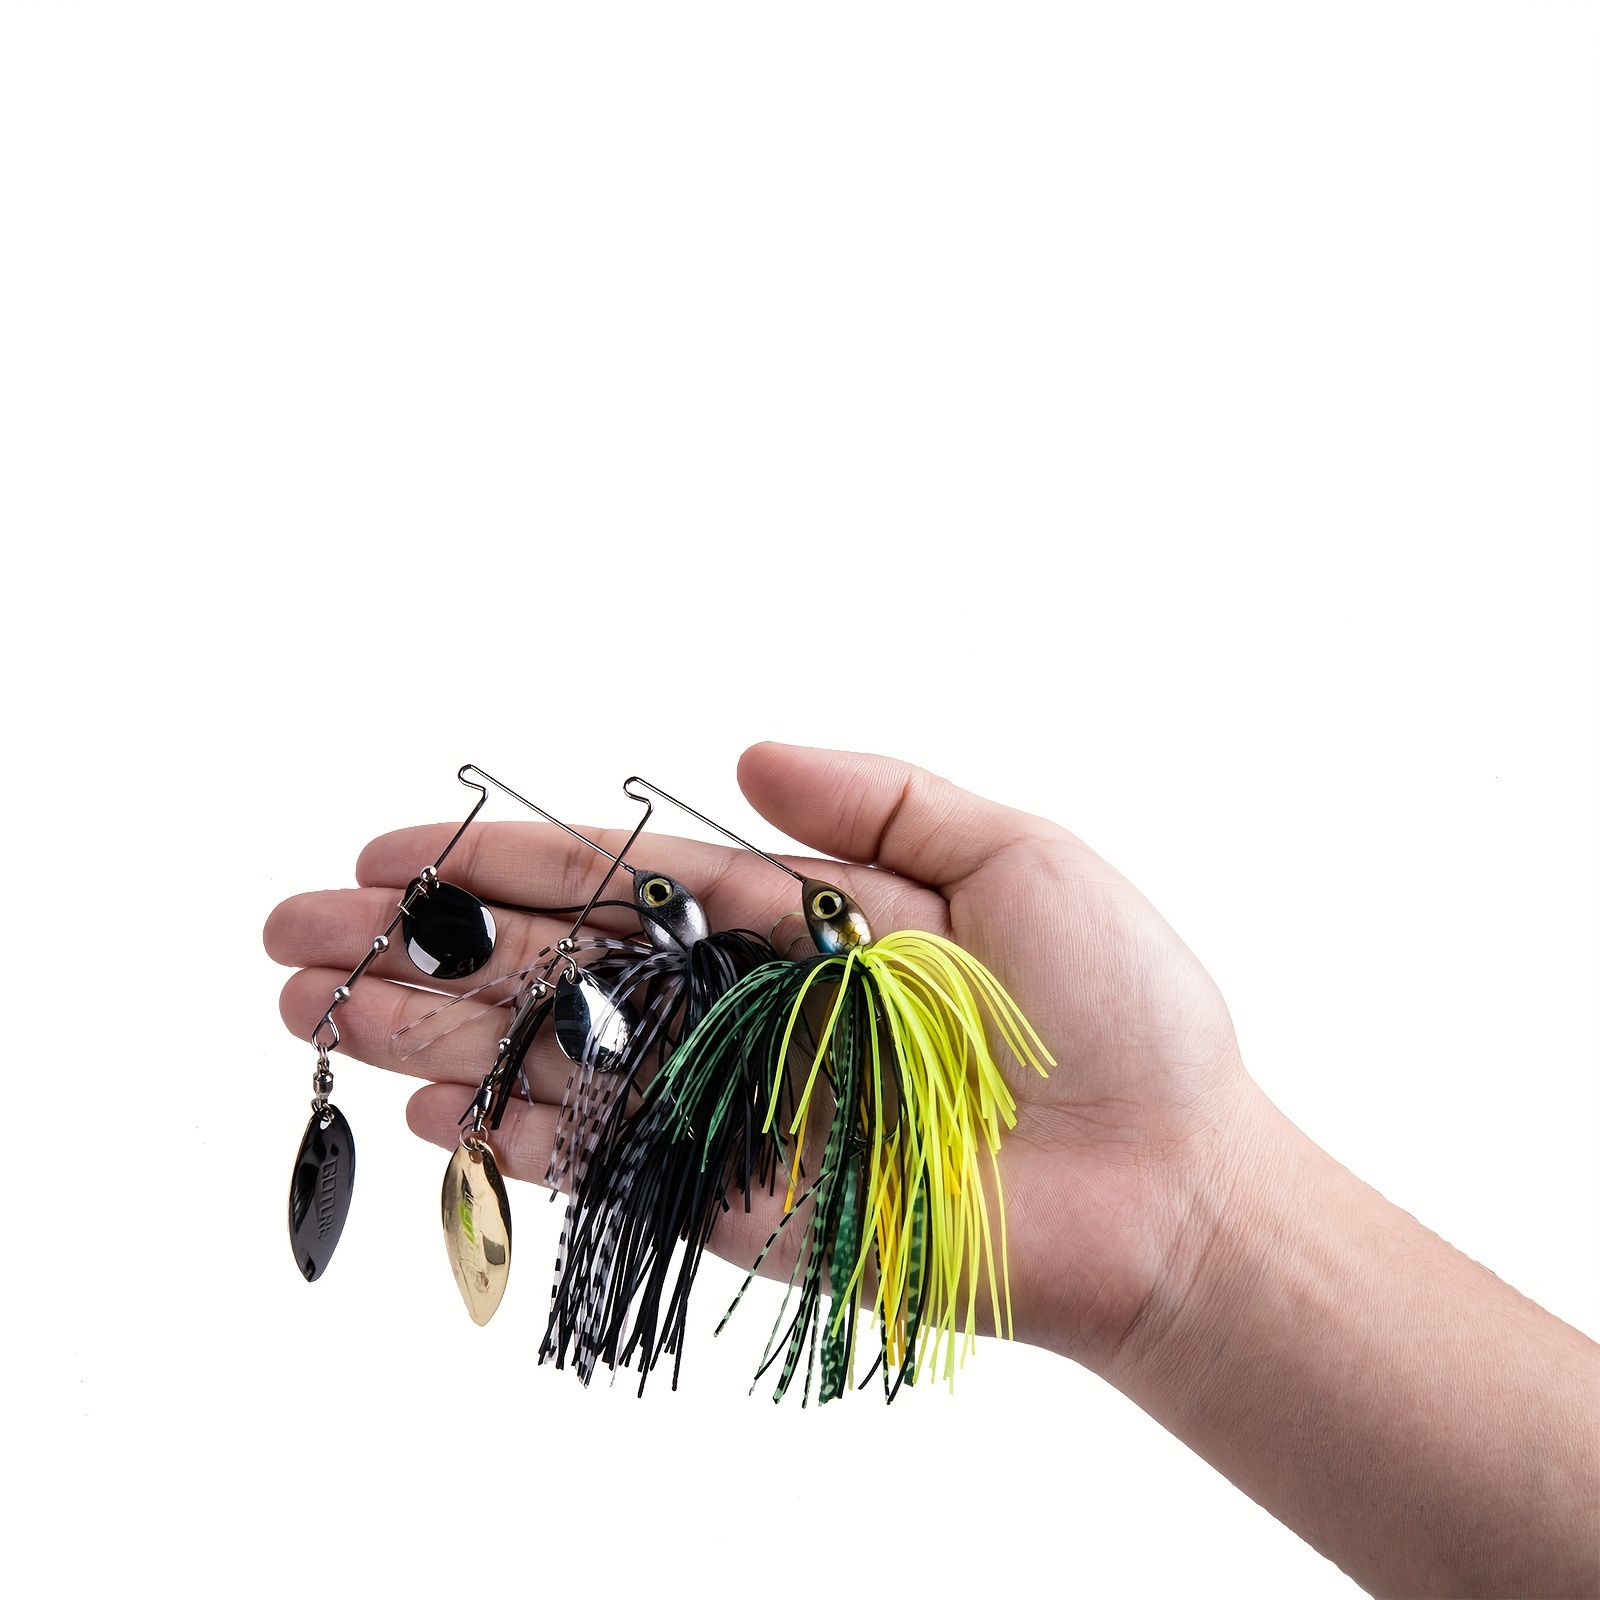 Bass Fishing Spinner Baits Lure Kit Hard Metal Spinnerbait Buzzbait  Swimbaits Fishing Jig Lure Set for Bass Trout, 6/9Pcs Mix Colors, Spinners  & Spinnerbaits -  Canada